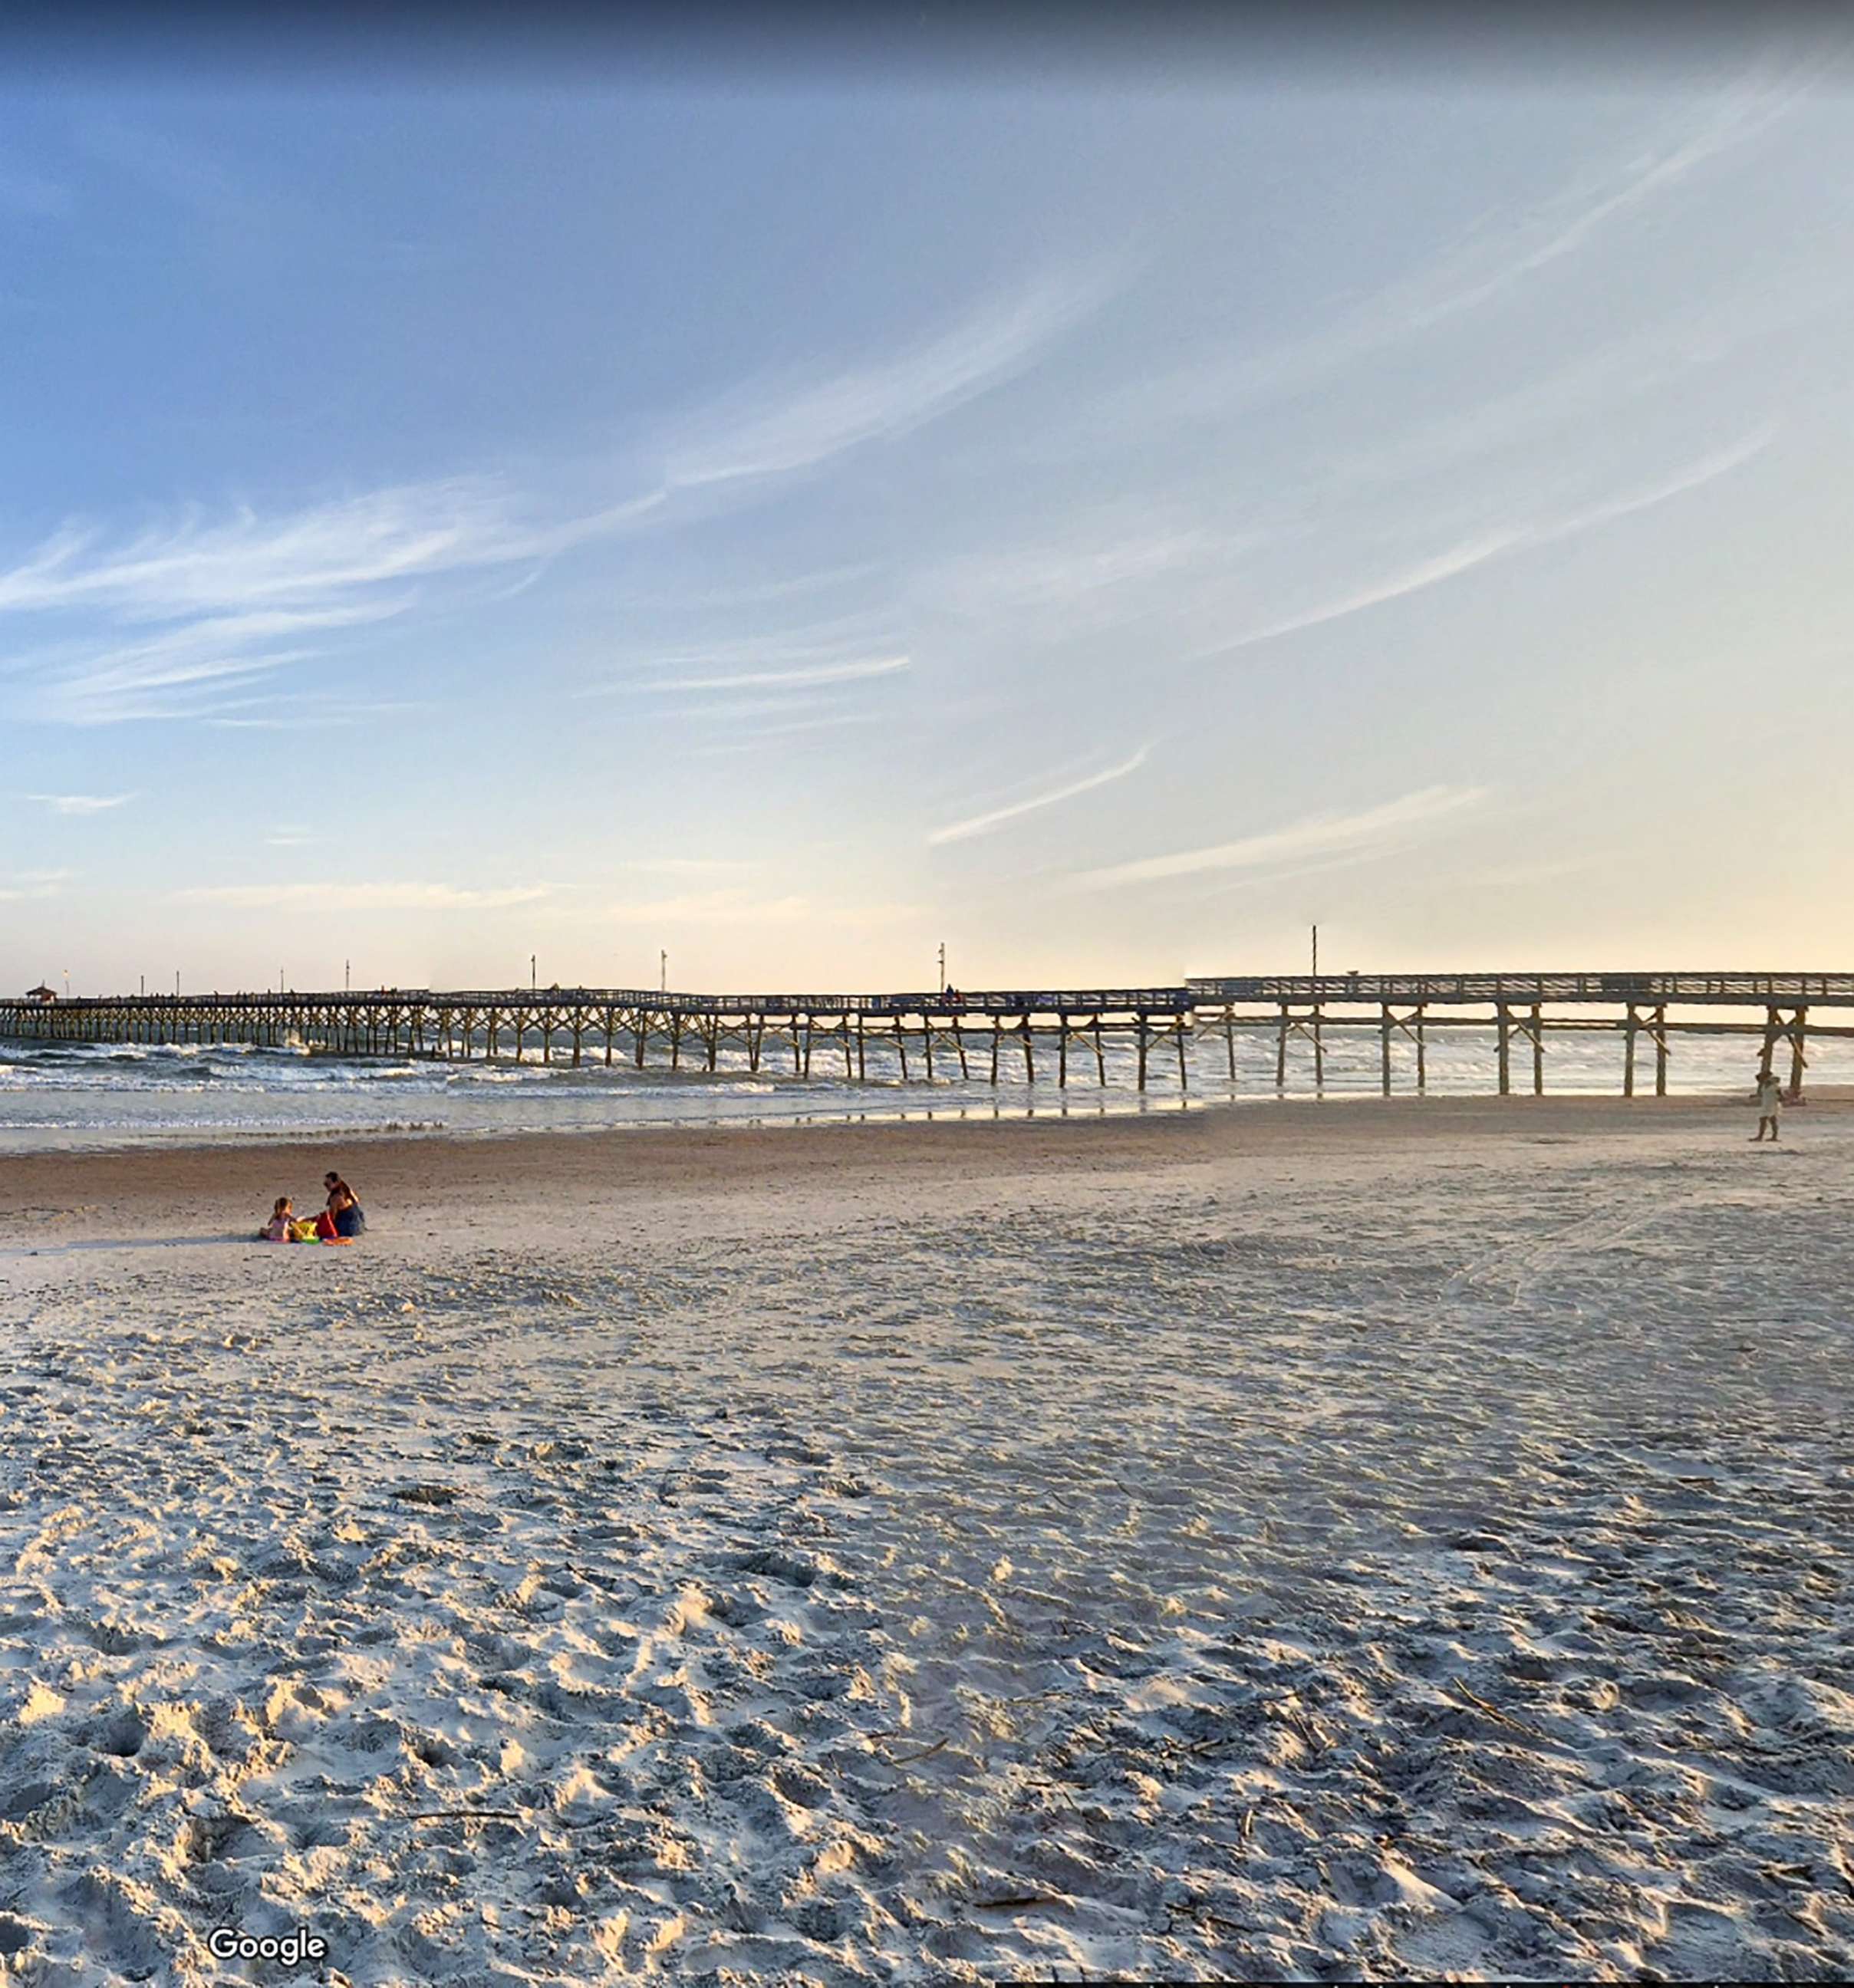 PHOTO: Oak Island near Raleigh, N.C., is pictured in this undated image from Google.